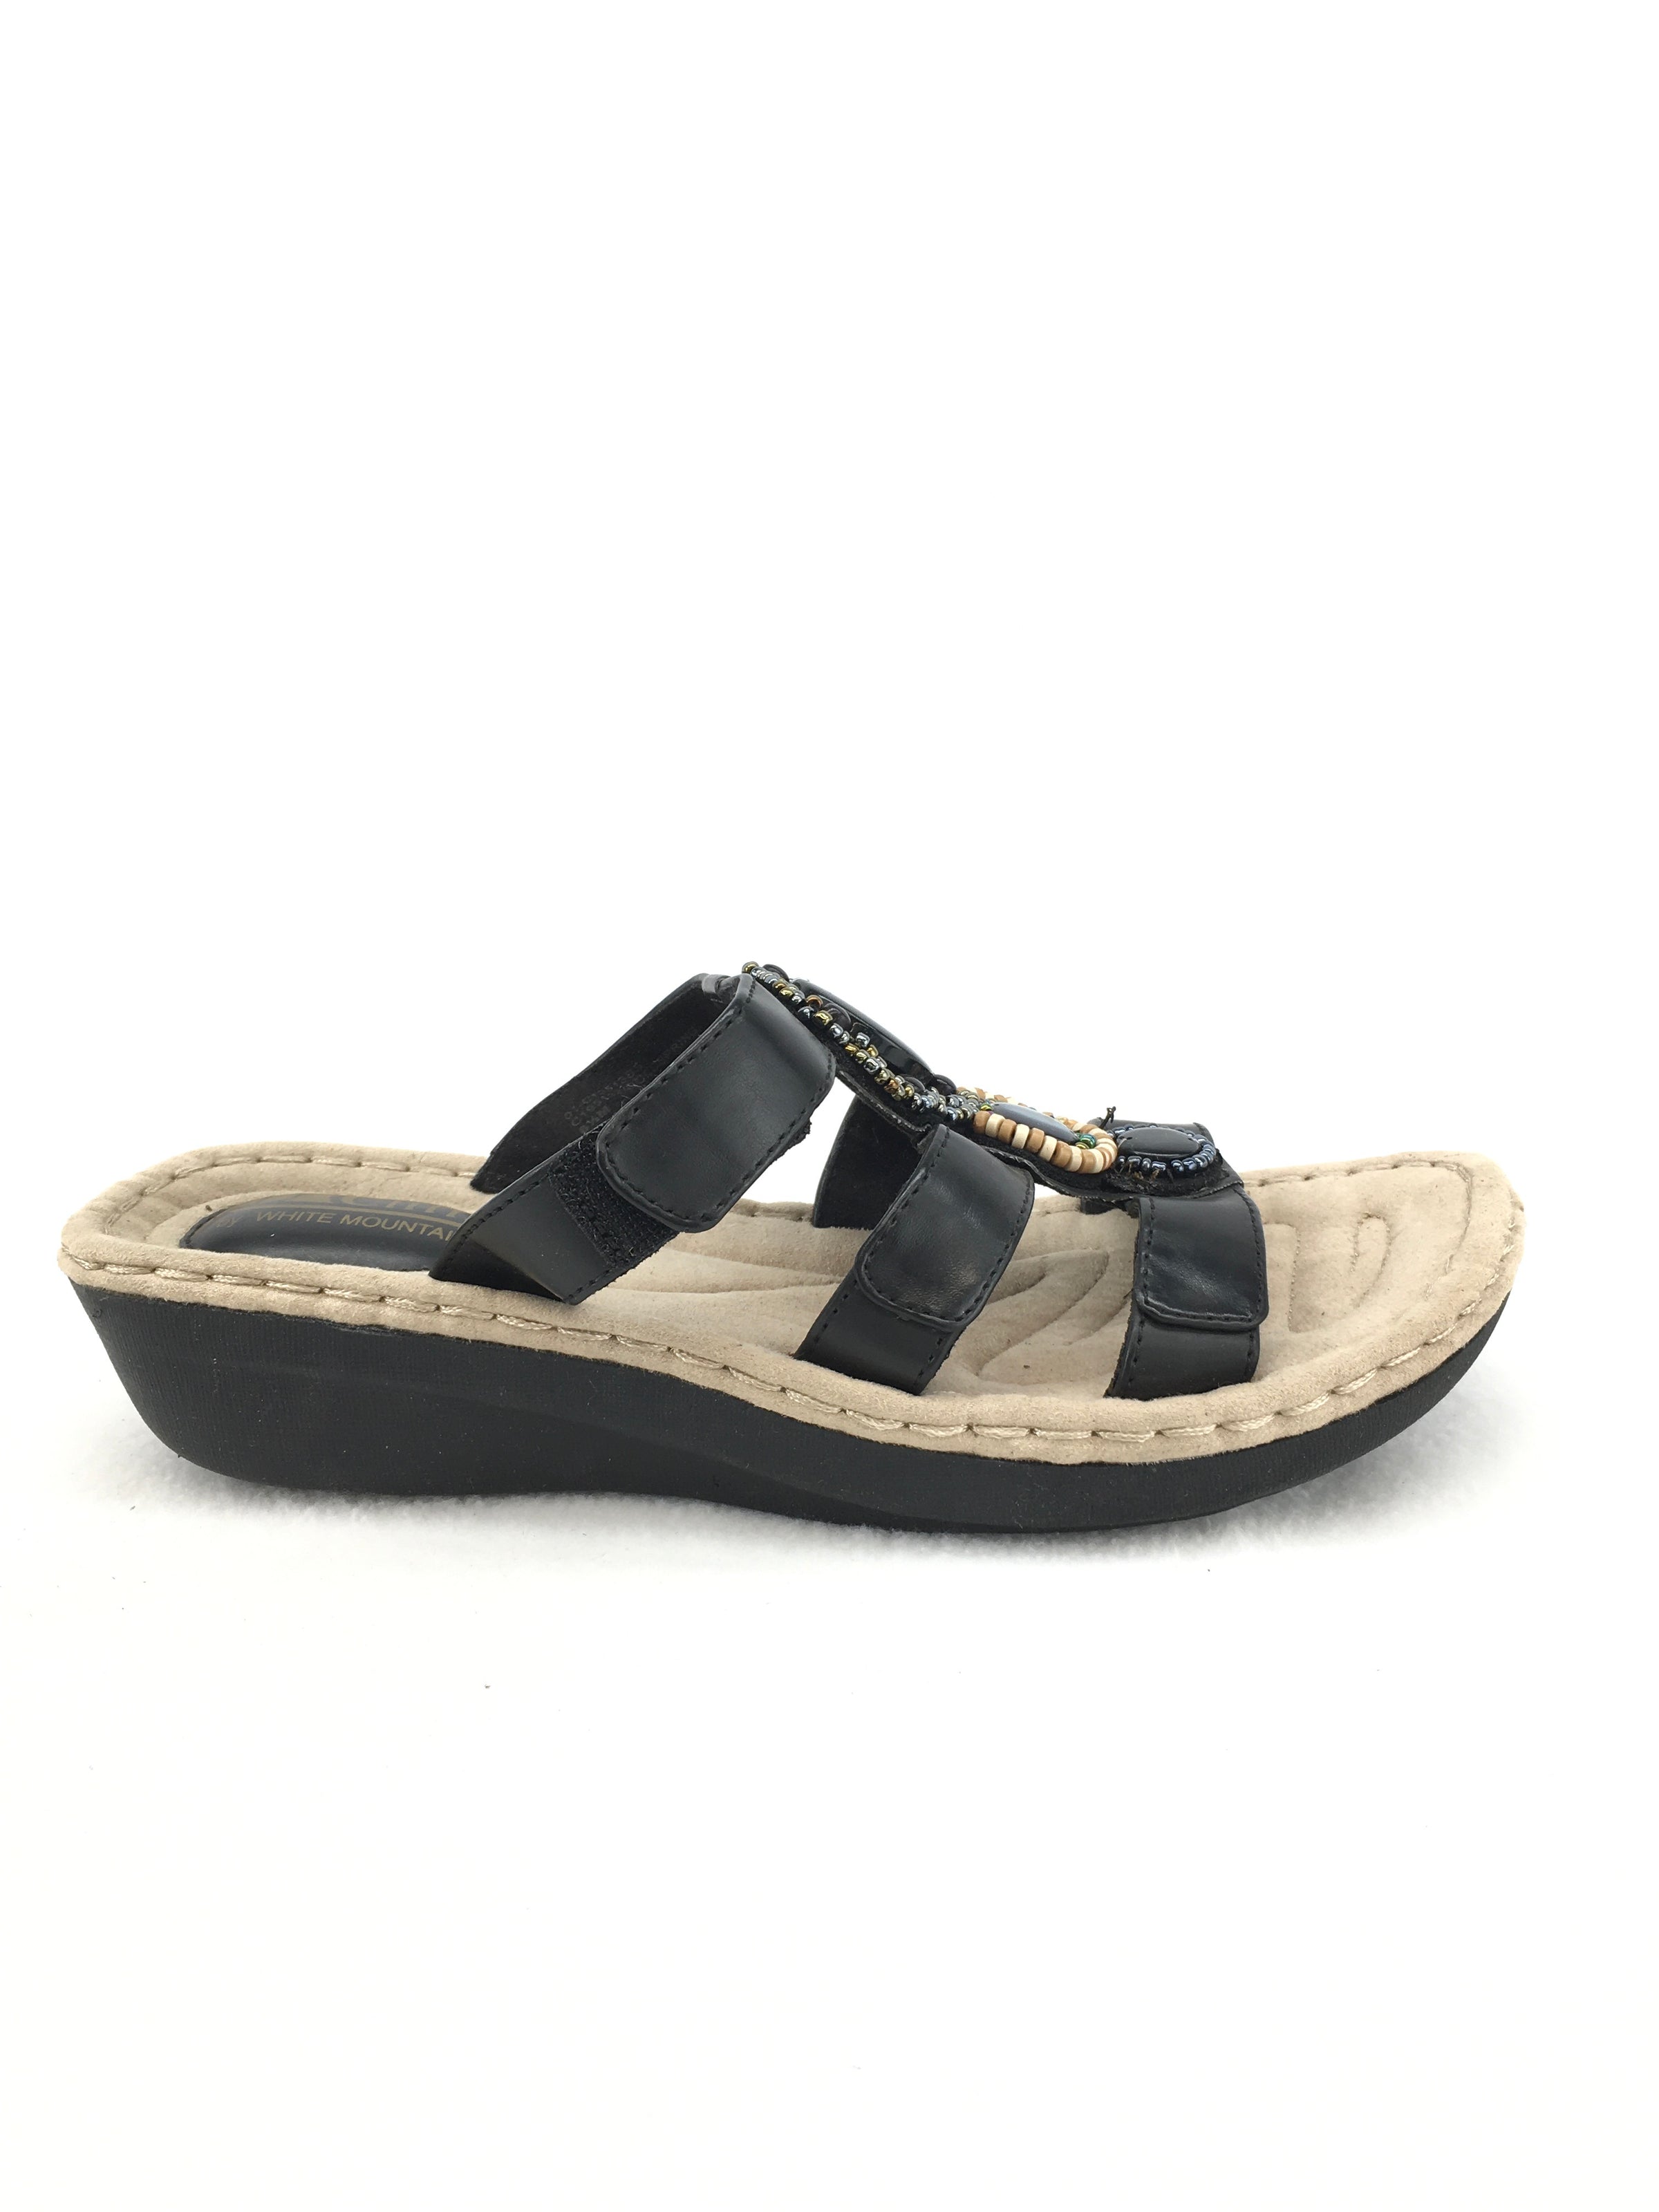 Cliffs by White Mountain Comfort Sandals Size 8.5M